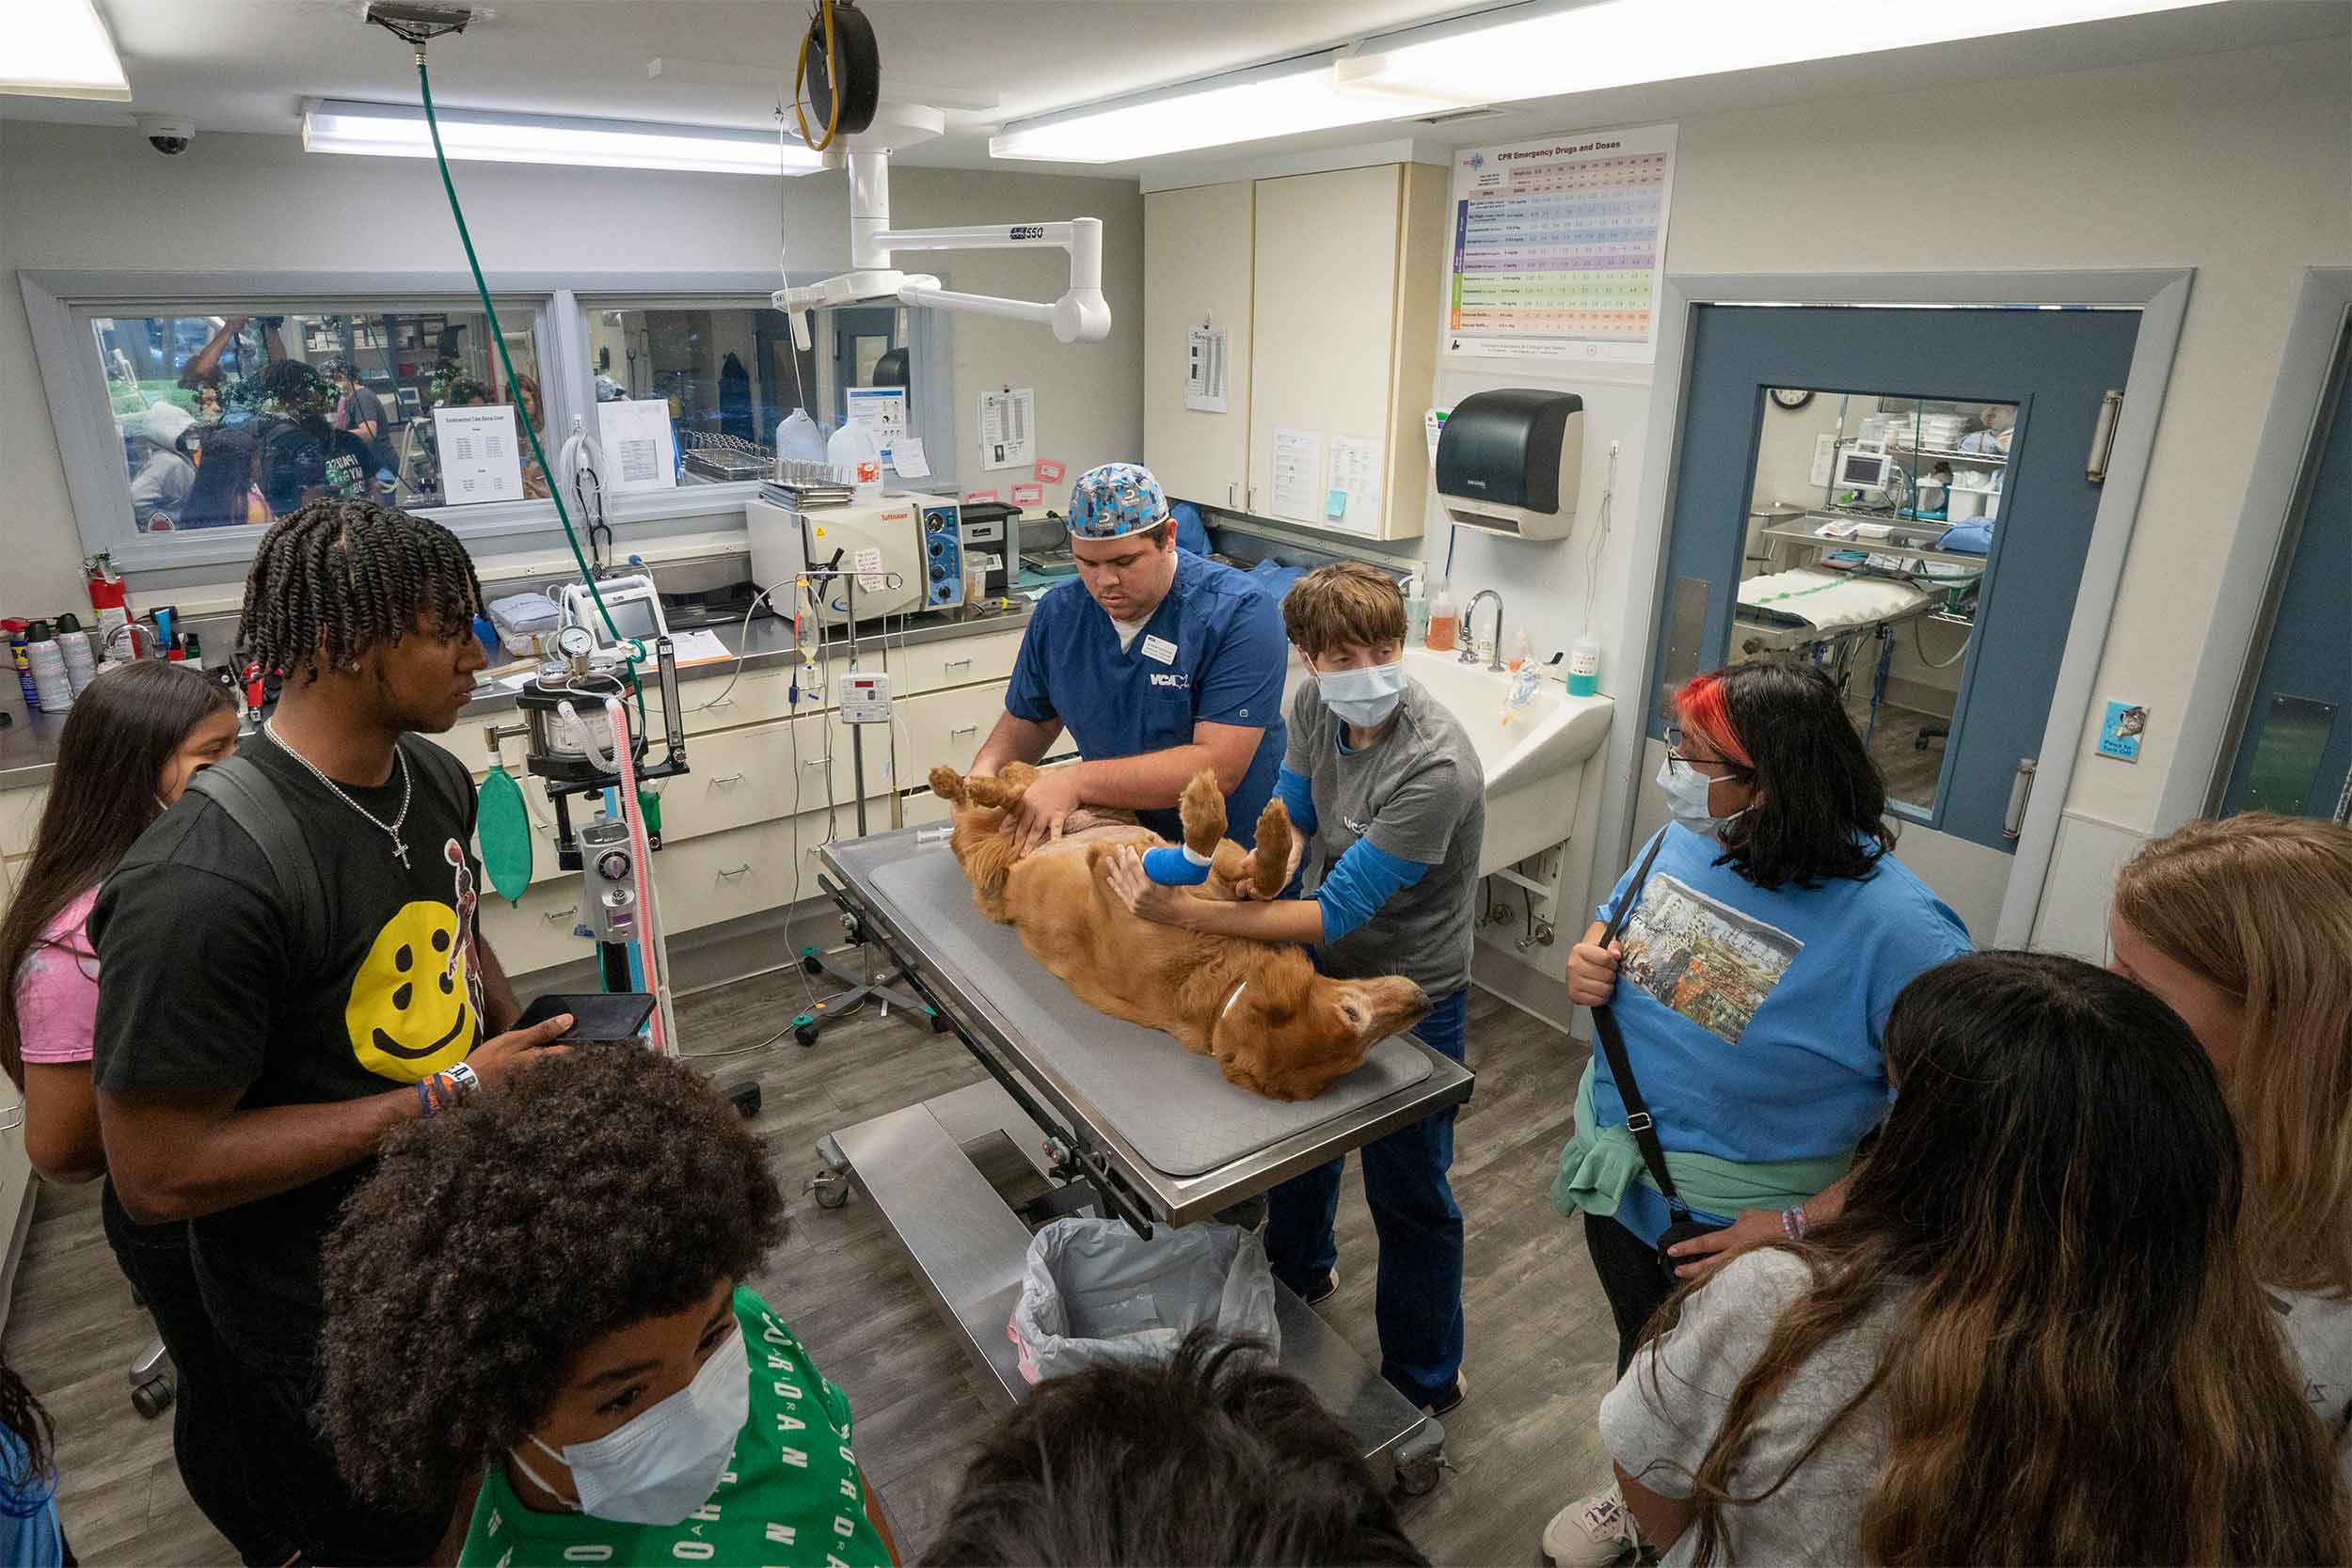 Students gather around a vet examination table to observe vet clinic work